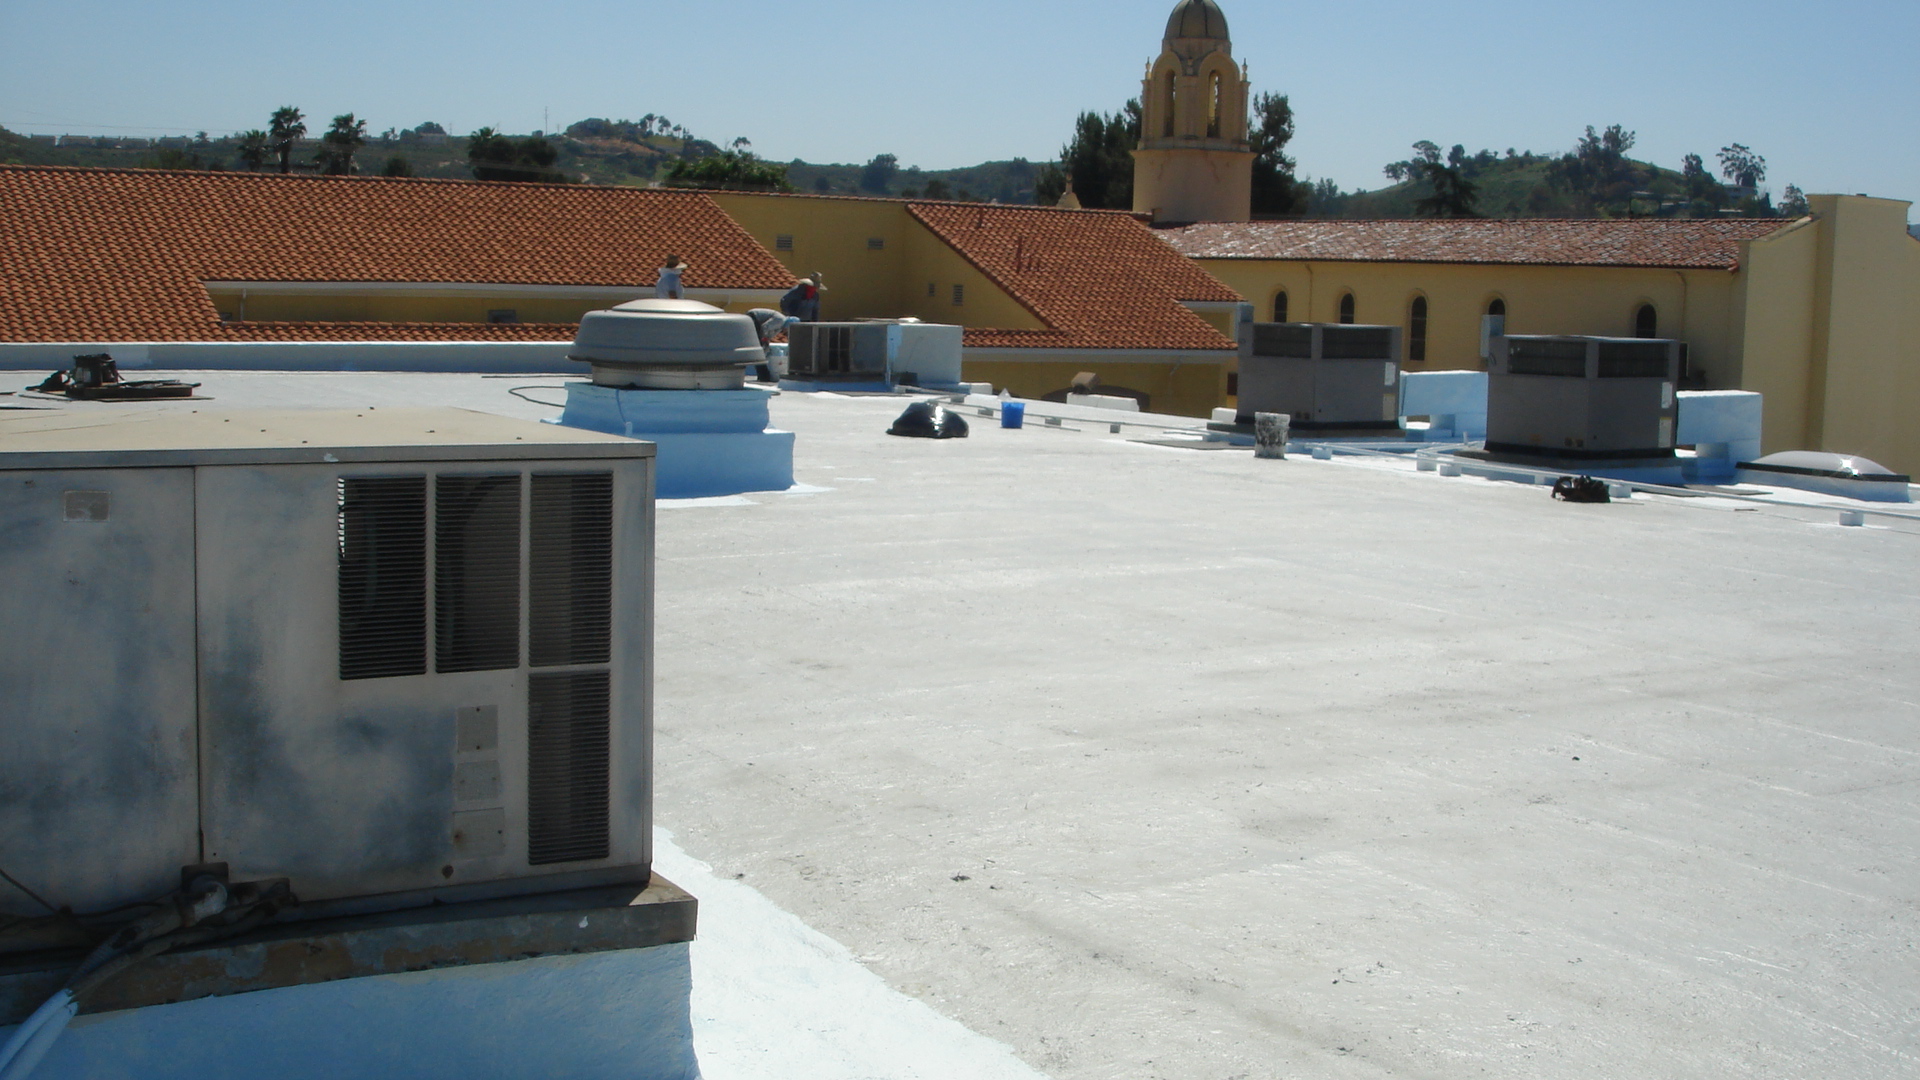 Re-Roofing and Roof Restoration | Commercial and Industrial Re-Roofing and Roof Restoration in California | Commercial and Industrial Re-Roofing and Roof Restoration in Nevada | Commercial and Industrial Re-Roofing and Roof Restoration in Arizona